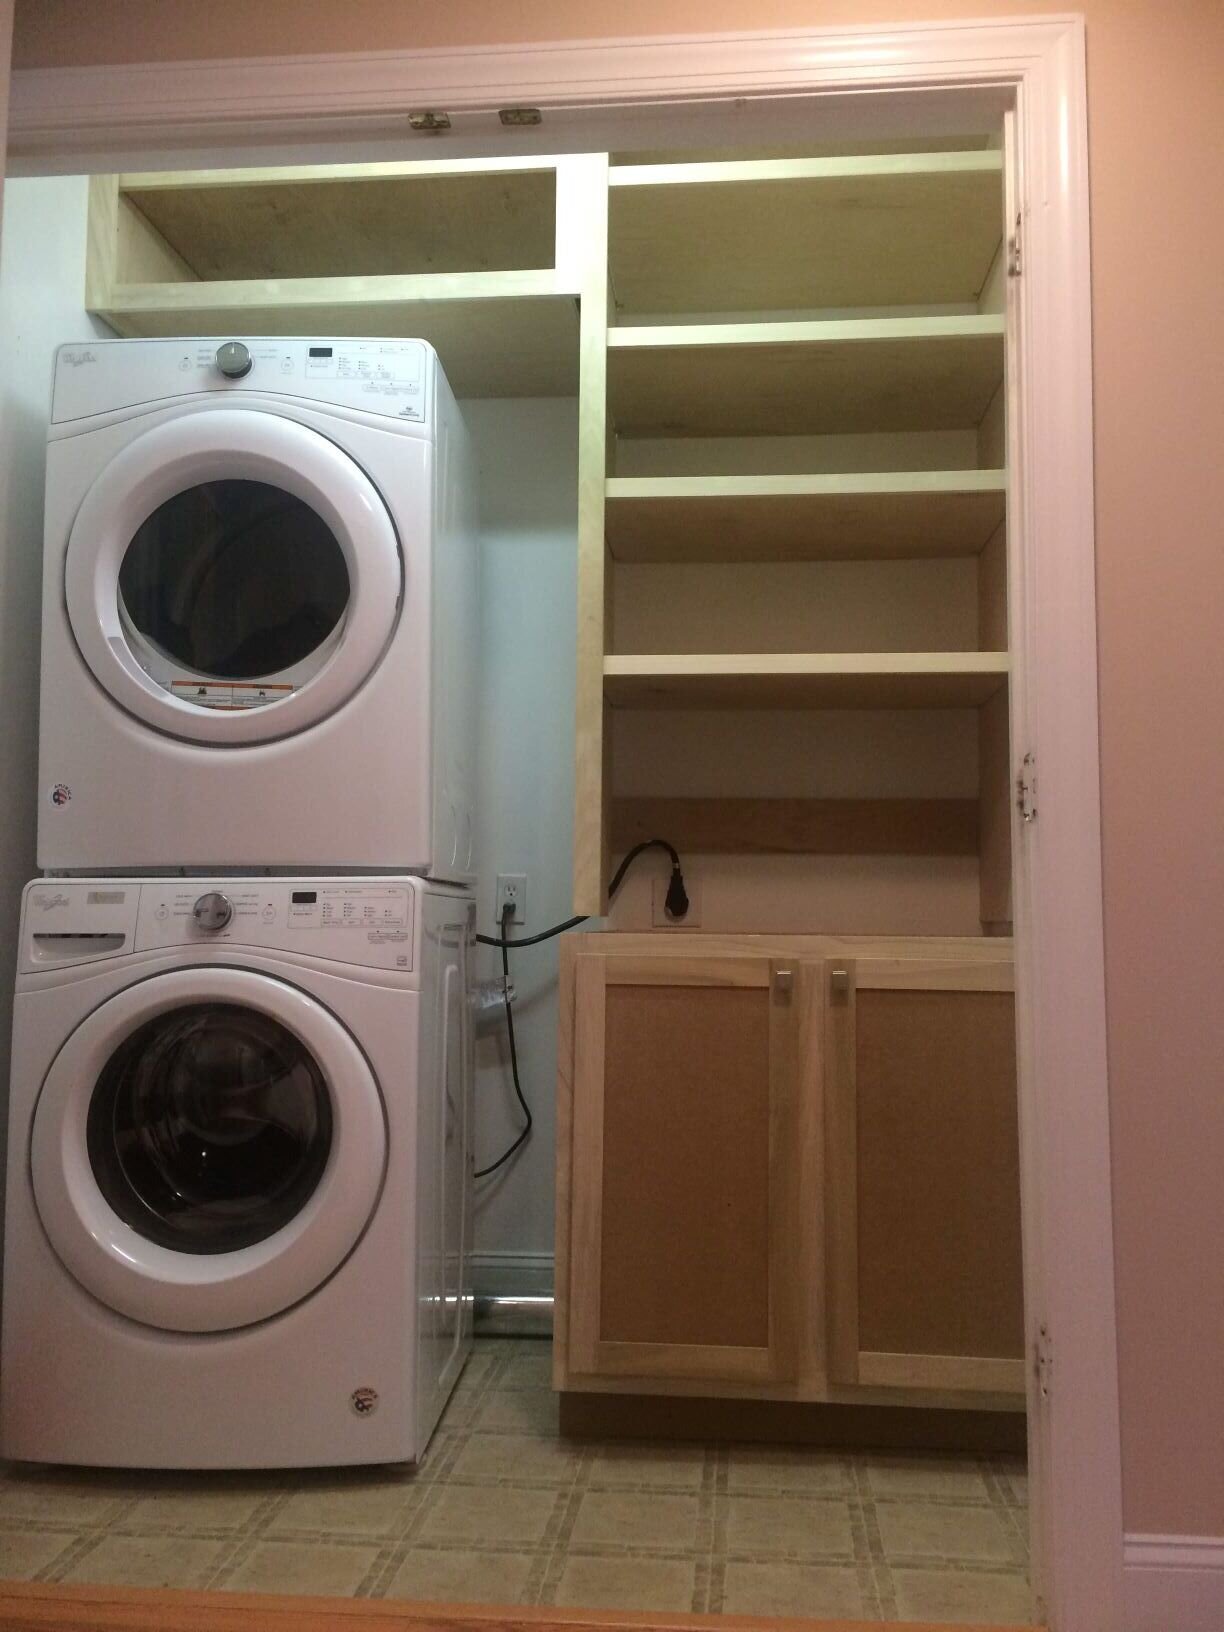  Poplar frame and birch plywood make a paint grade cabinet for this laundry closet. 